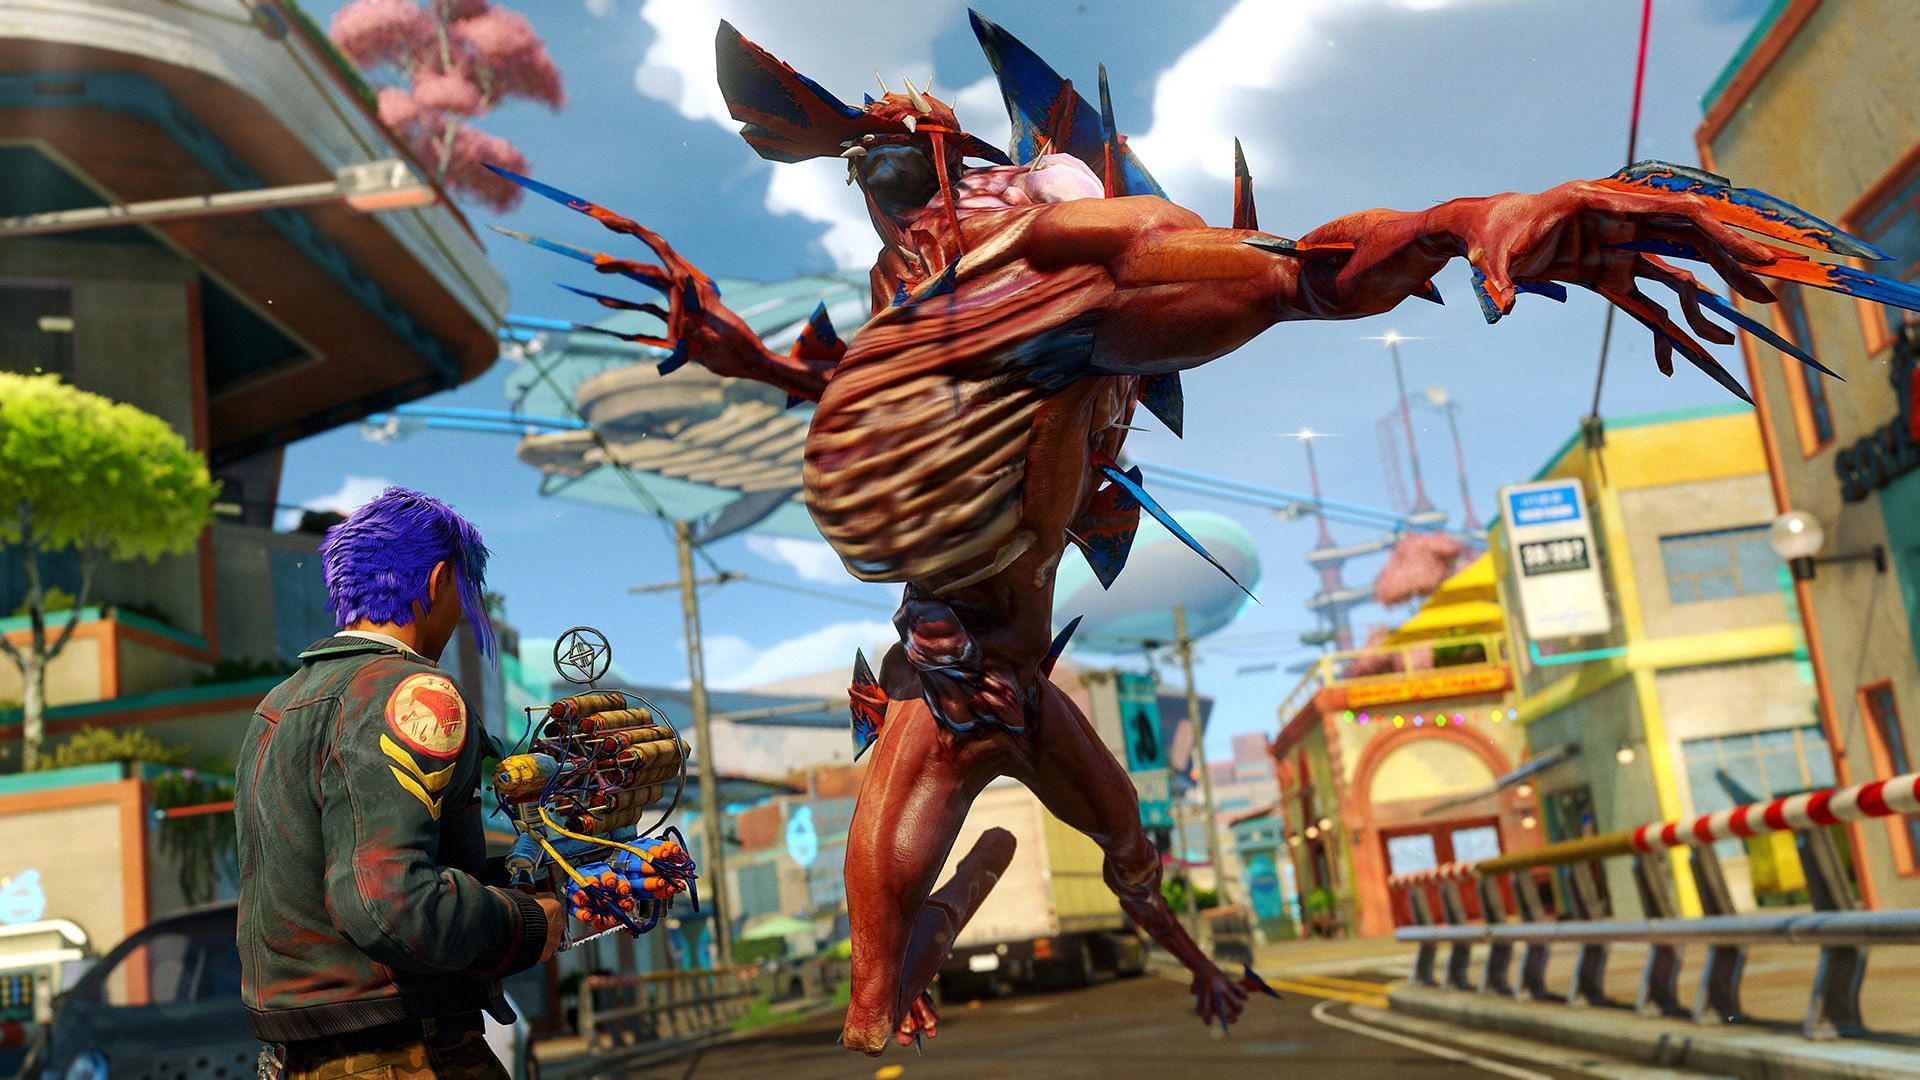 Insomniac Games Teasing Sunset Overdrive Remaster For PS4 and PS5